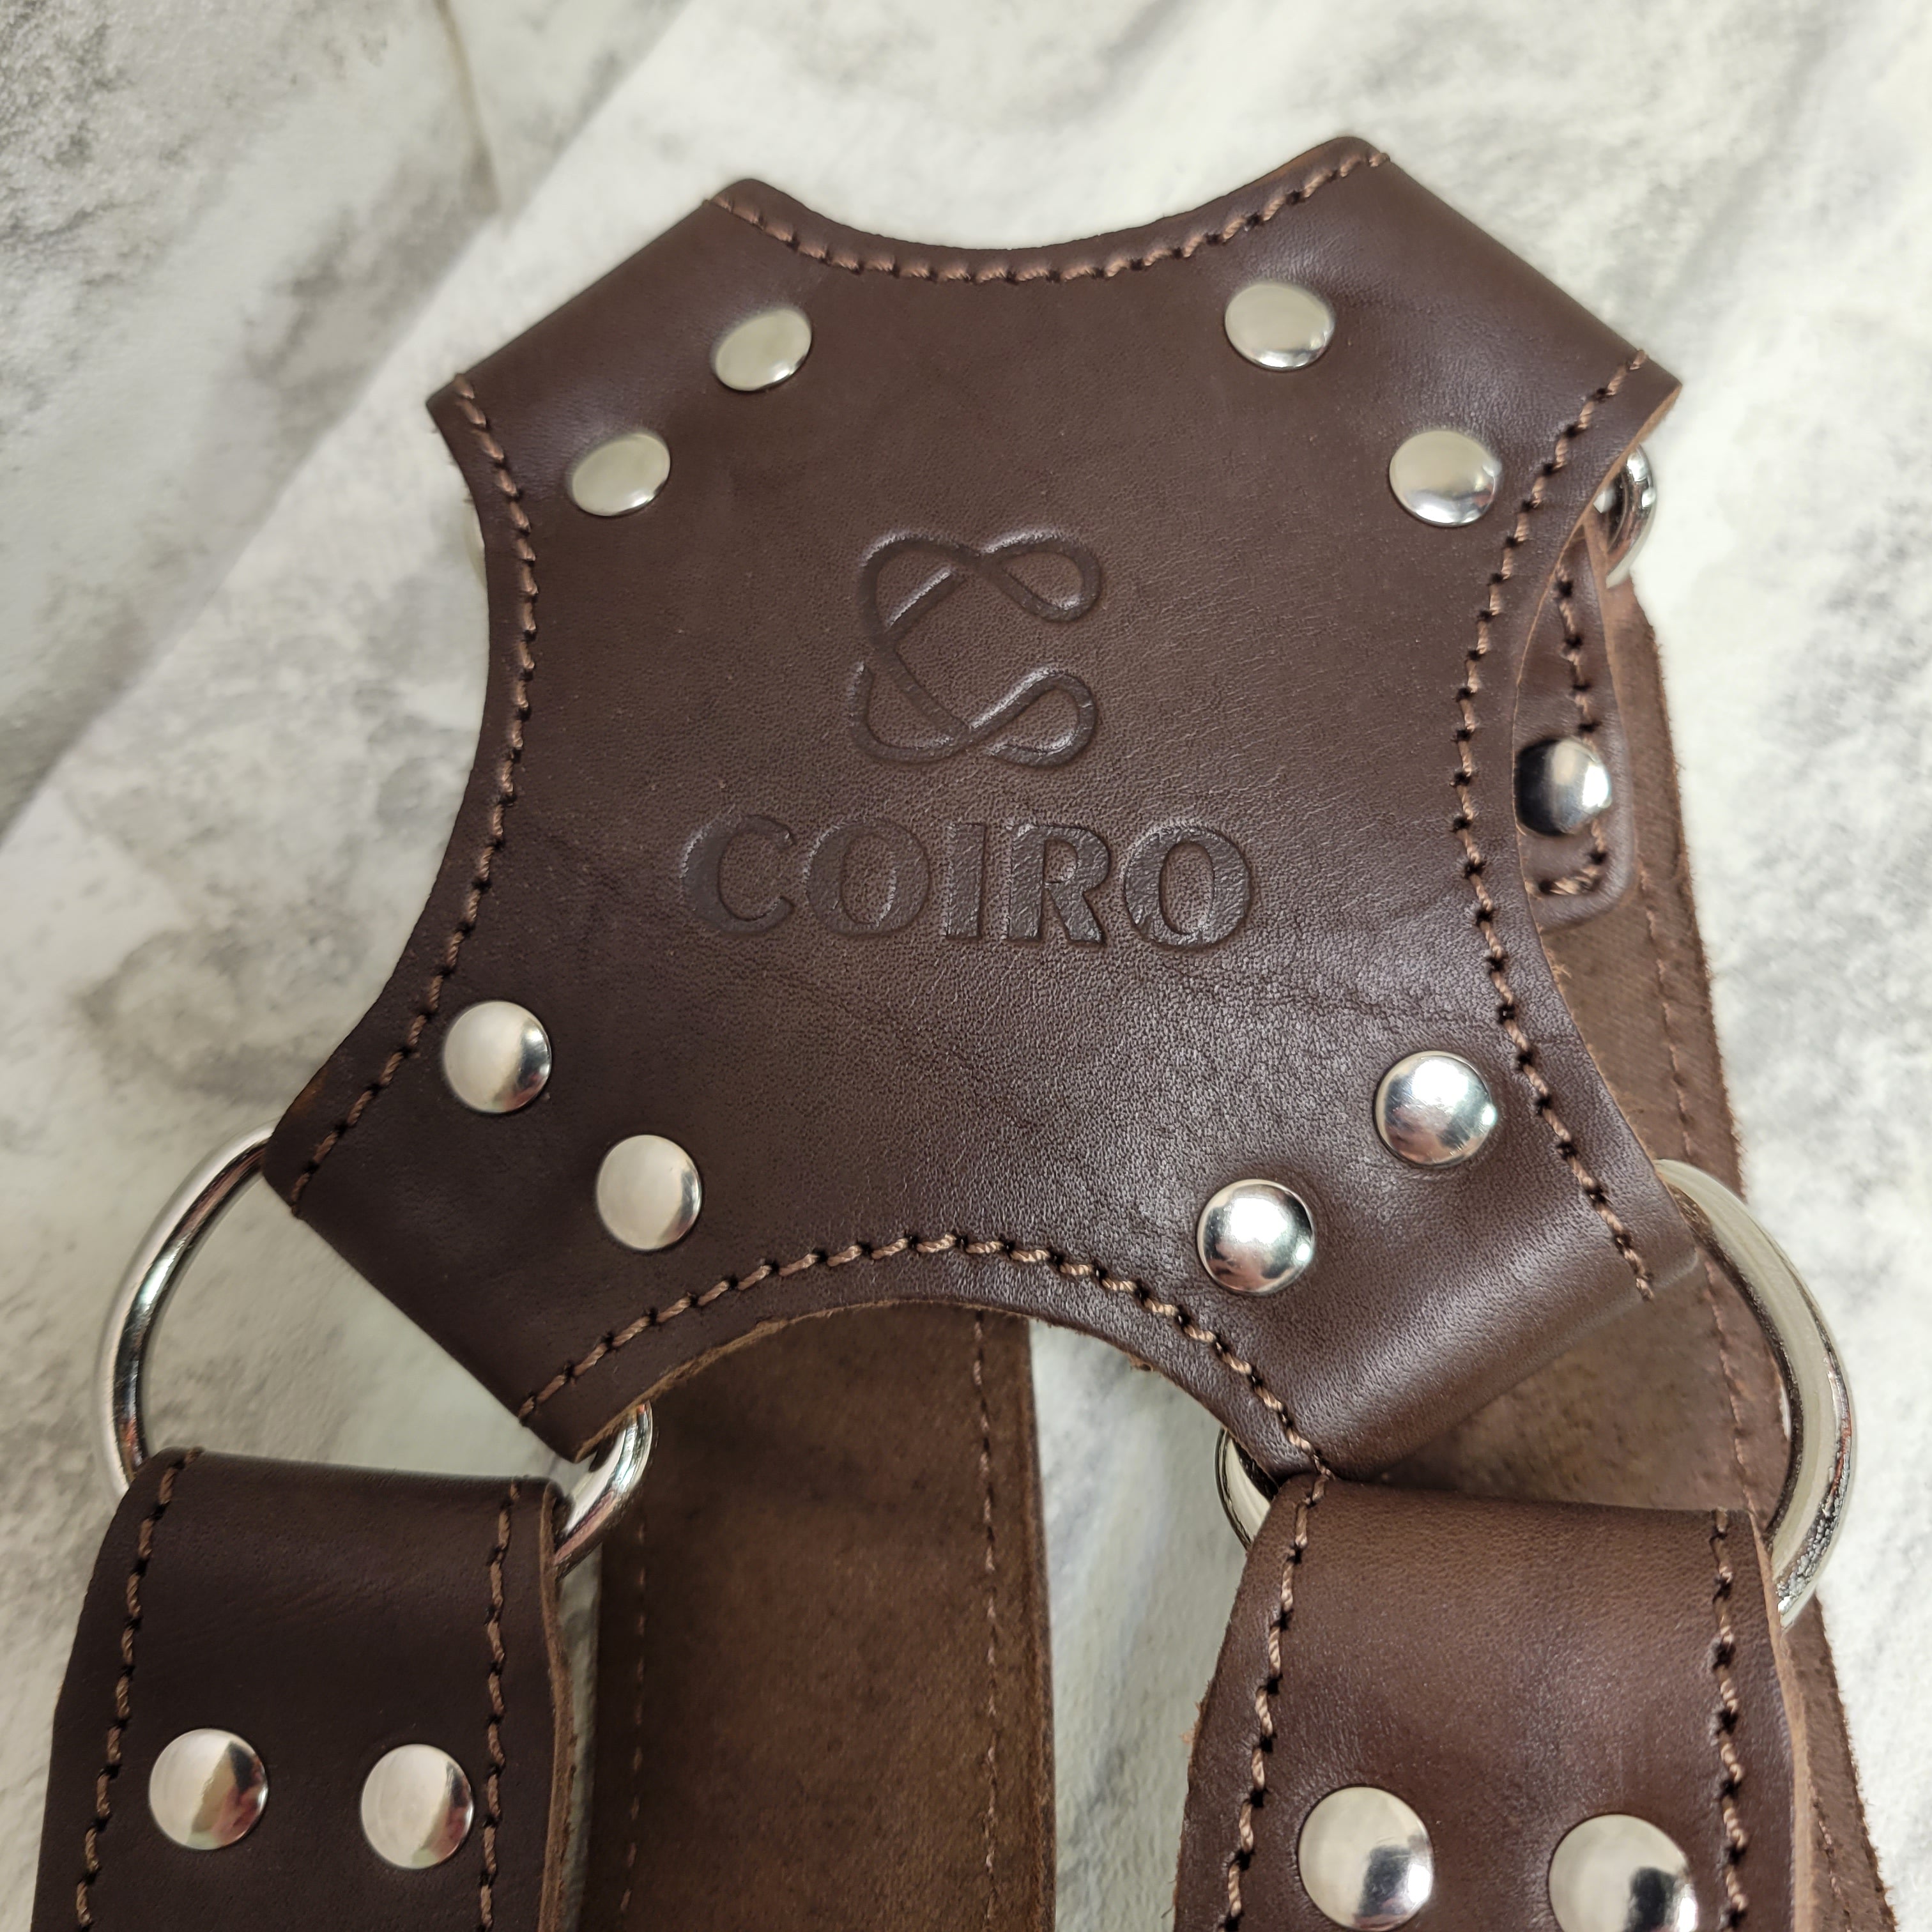 Dual Harness Two Cameras Shoulder Leather Strap DSLR/SLR by C Coiro (7746685632750)